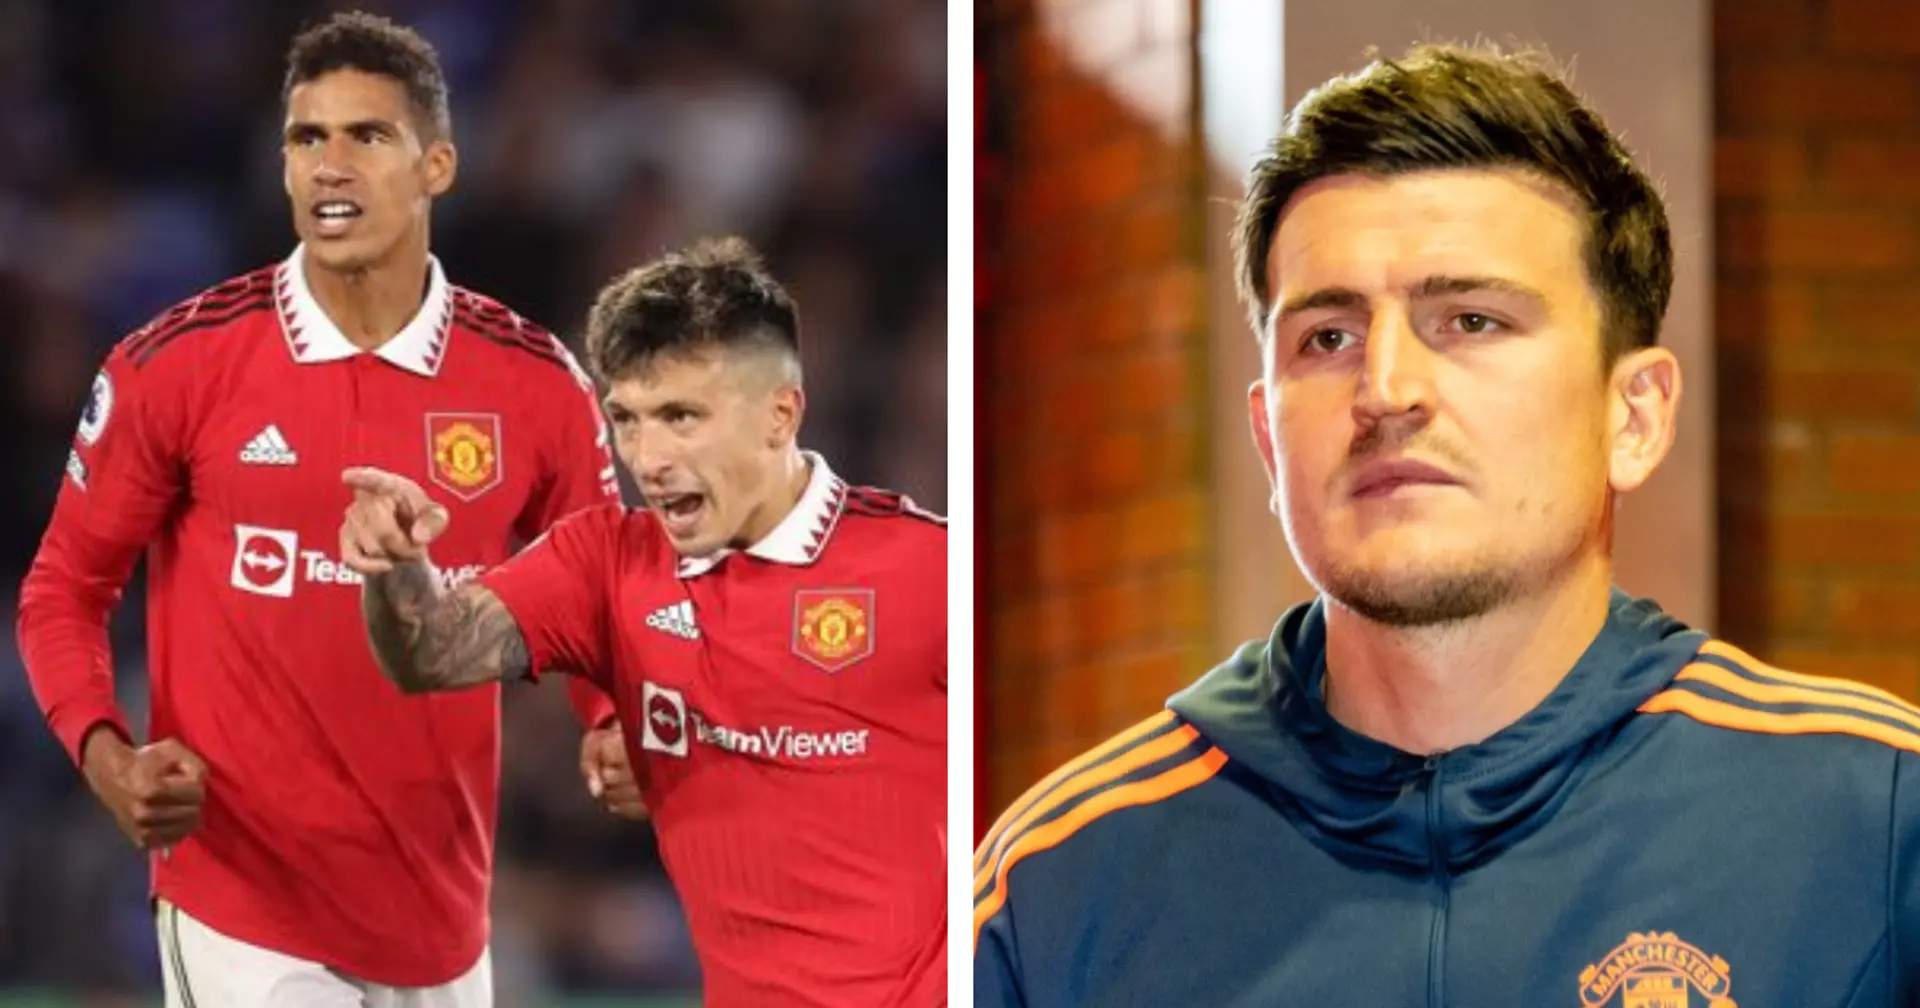 'I'm going to fight to get back into the team': Harry Maguire outlines his post-World Cup plans